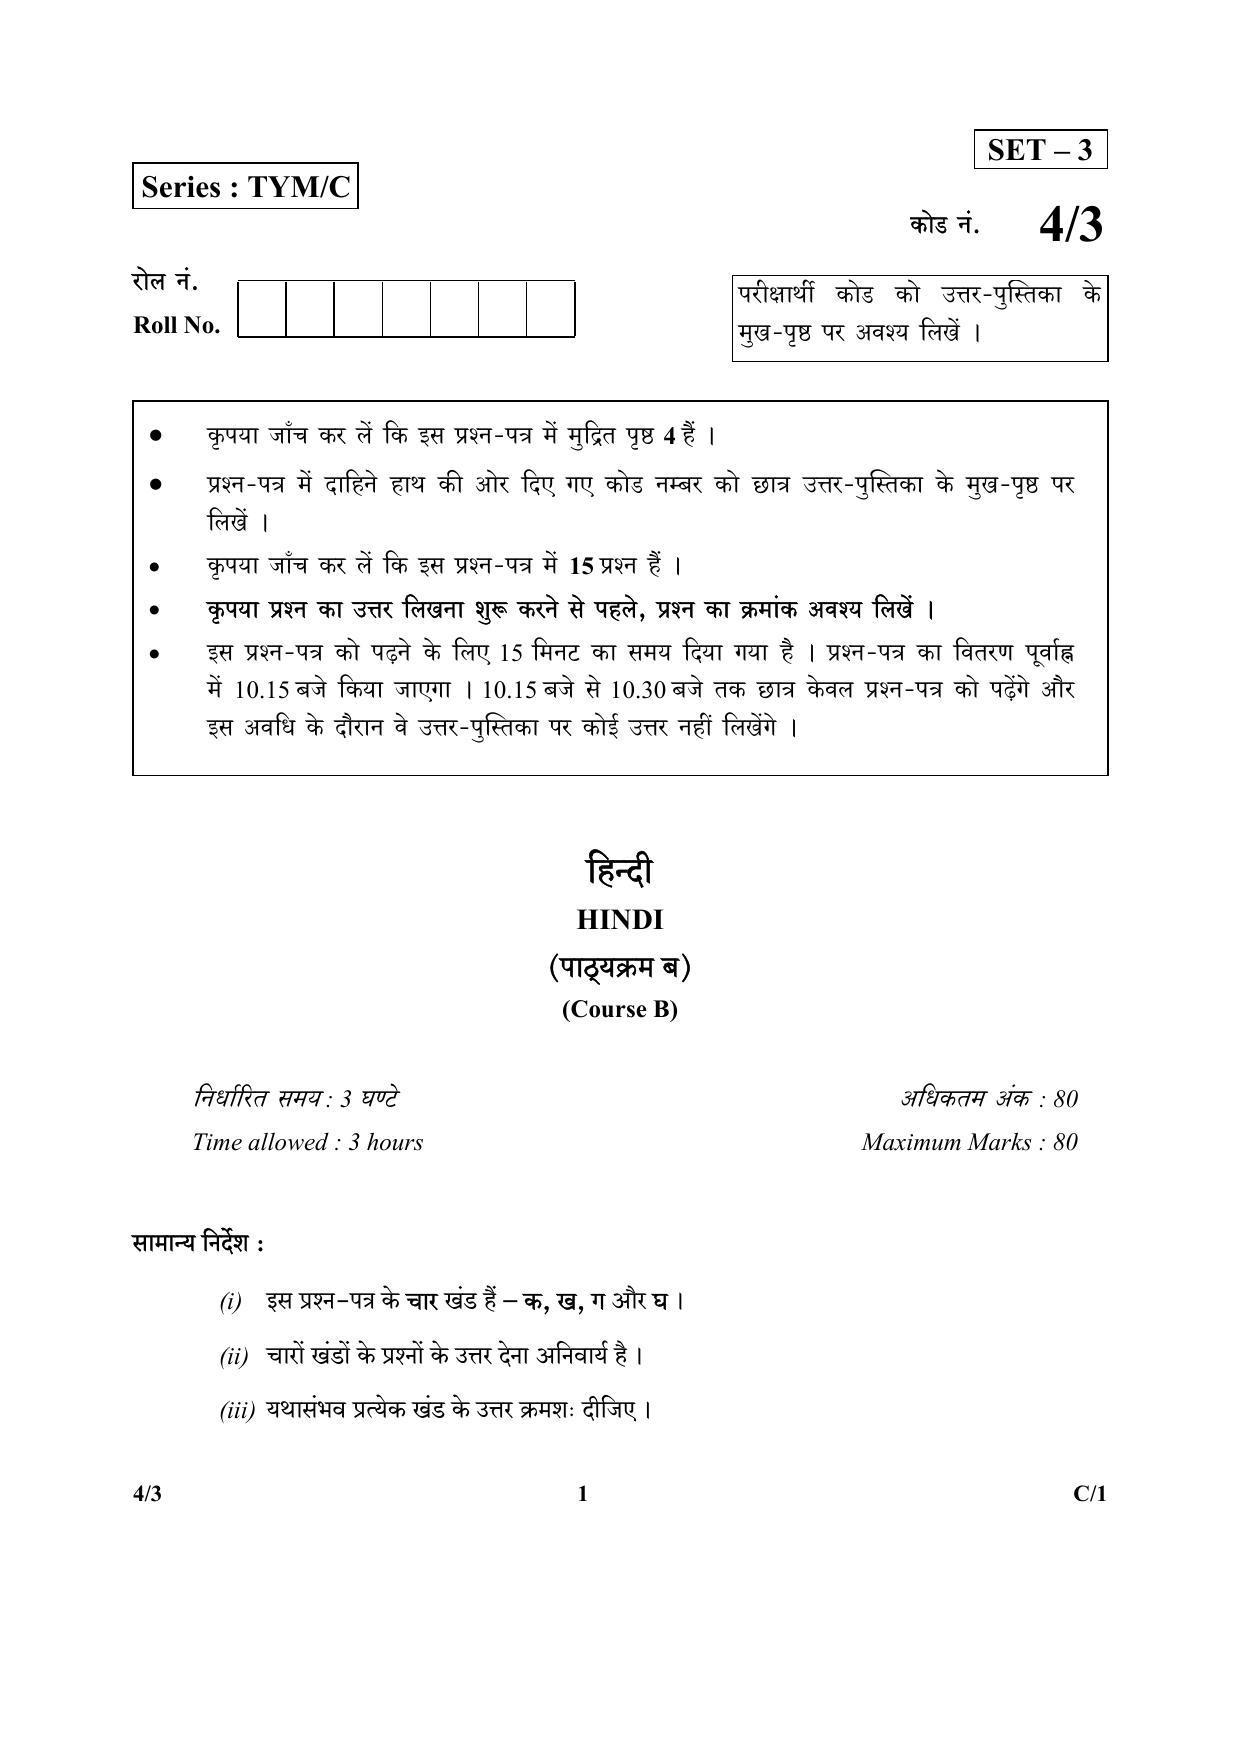 CBSE Class 10 4-3_Hindi 2018 Compartment Question Paper - Page 1